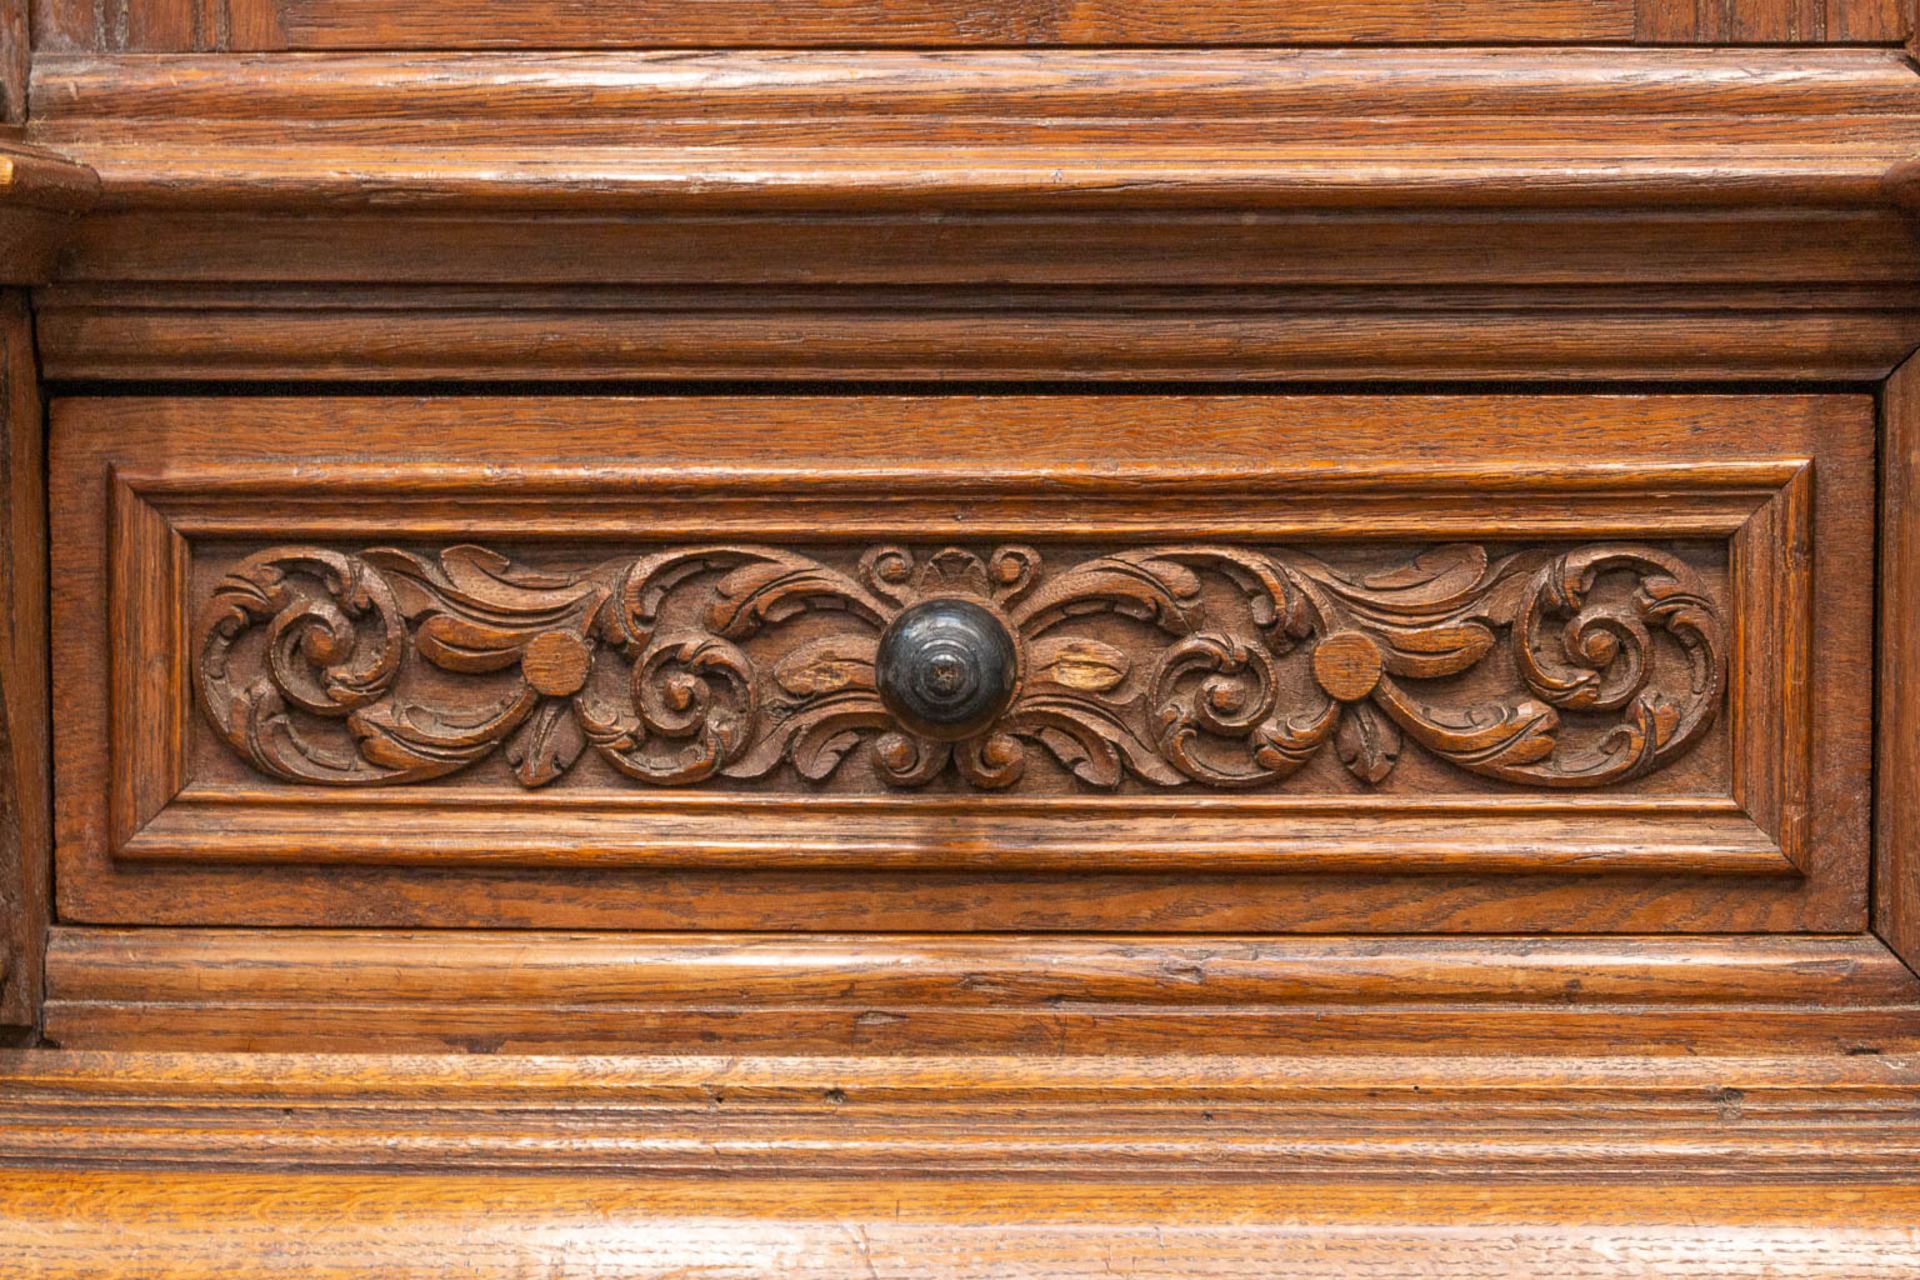 A cabinet, made in Flemish renaissance style, oak with fine sculptures, 19th century. - Image 20 of 27